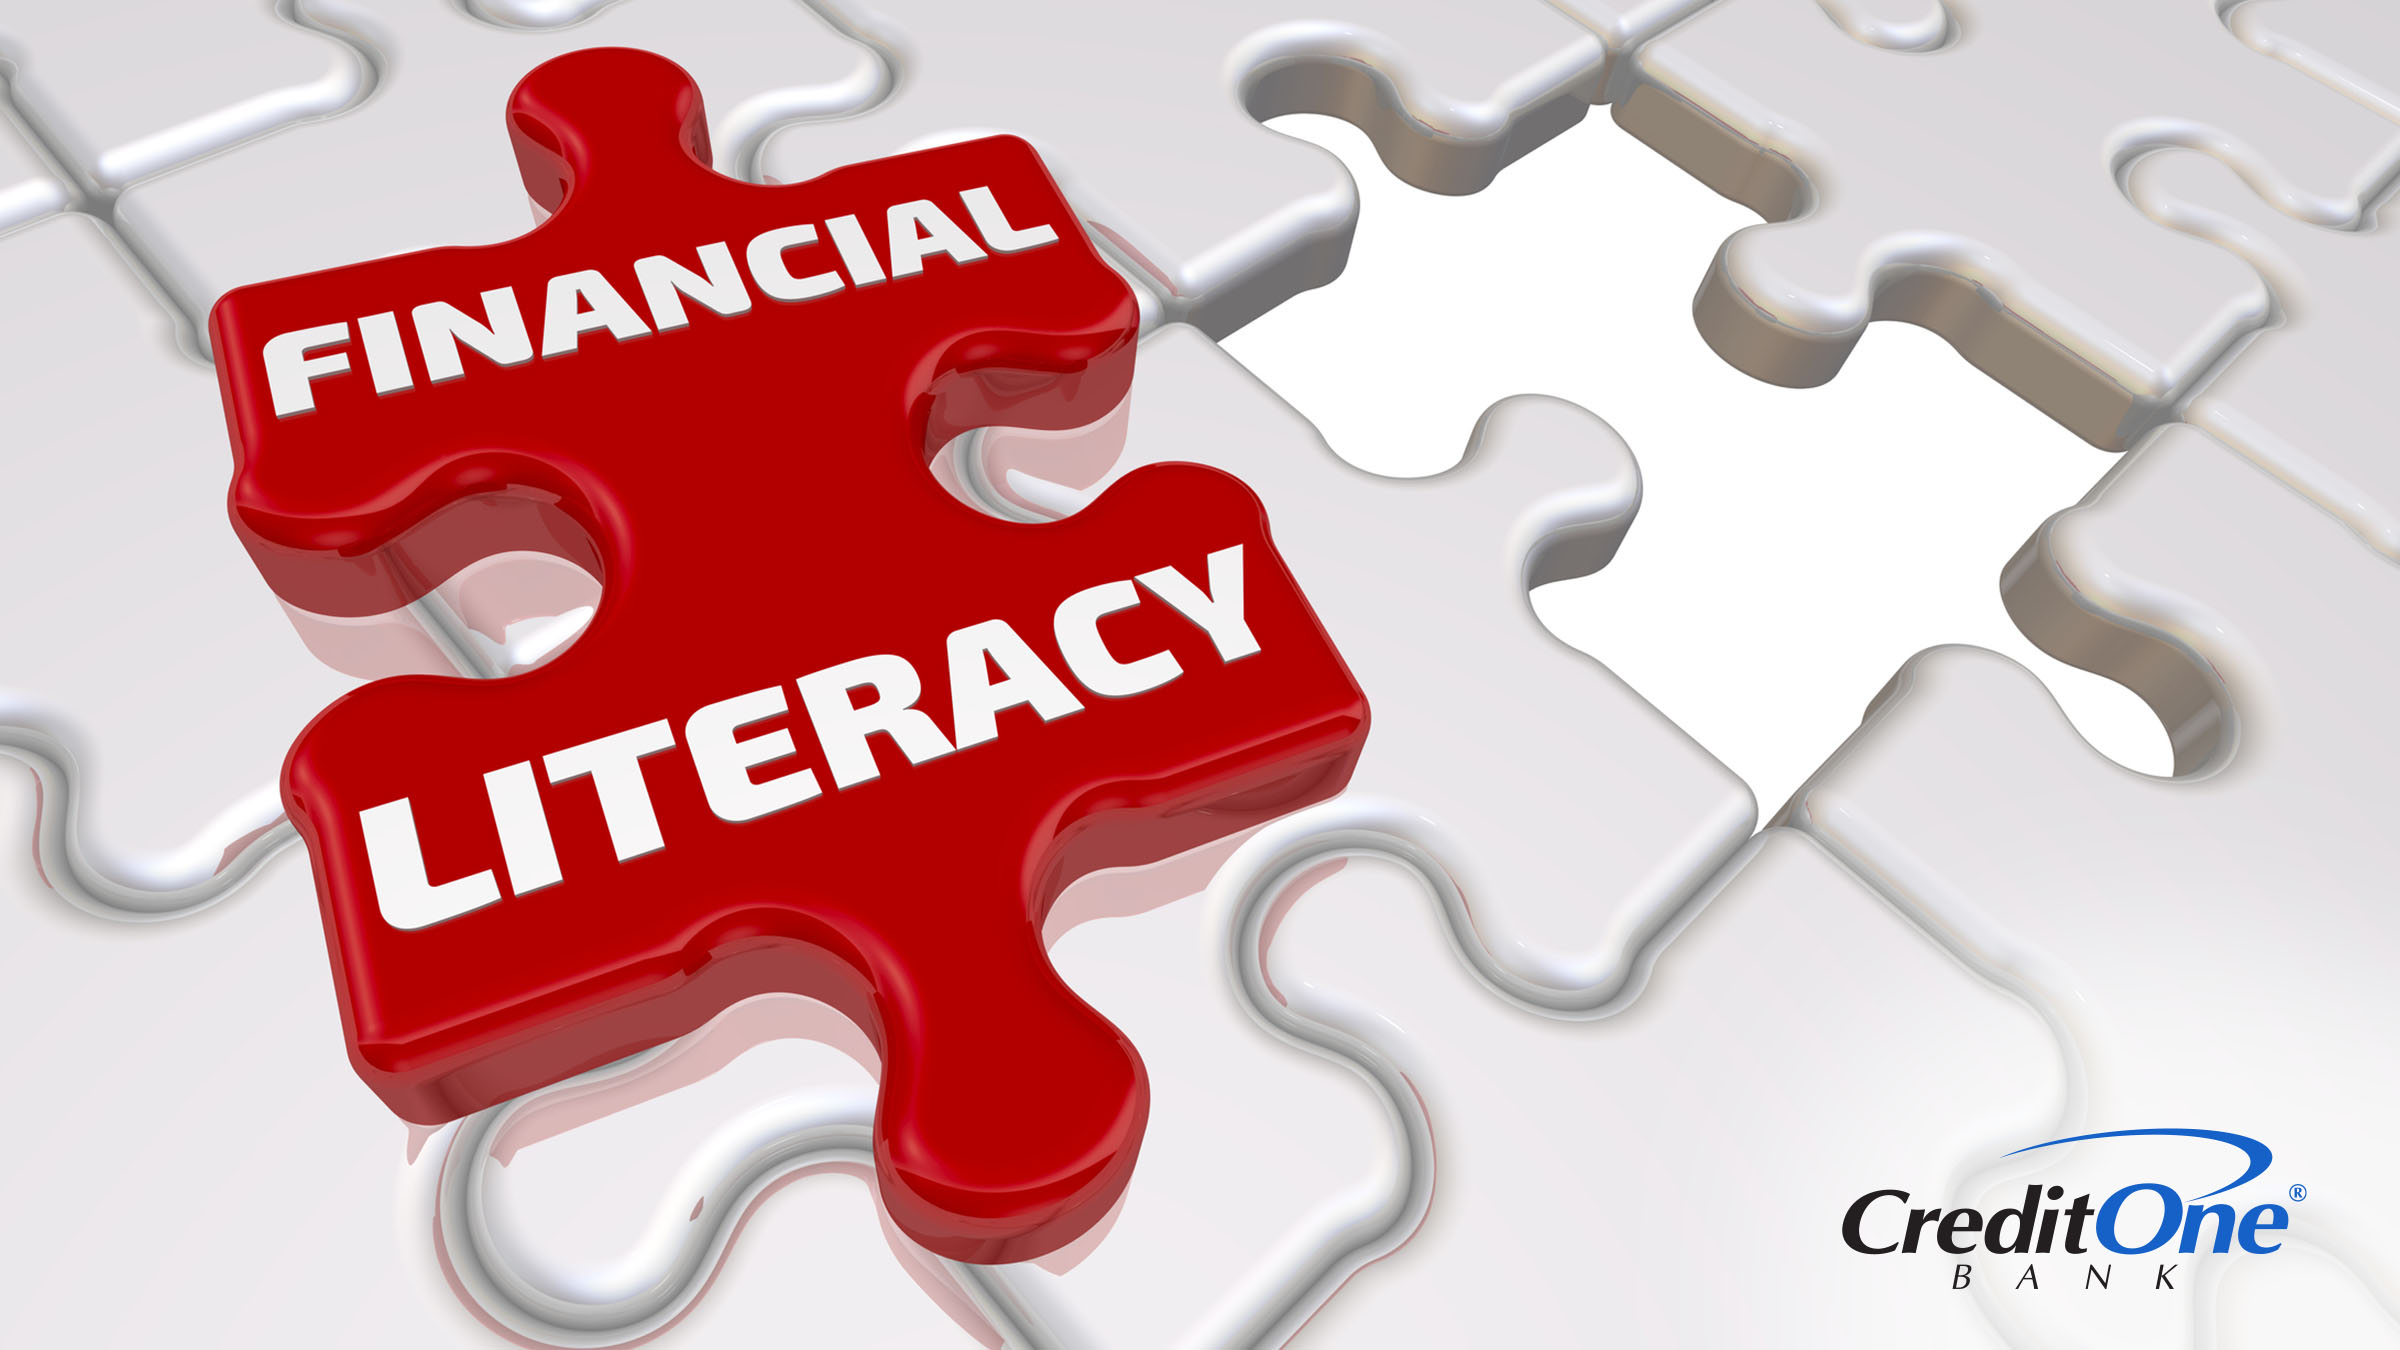 The words “financial literacy” are printed on a puzzle piece, showing that digital financial literacy is the missing piece of the puzzle.